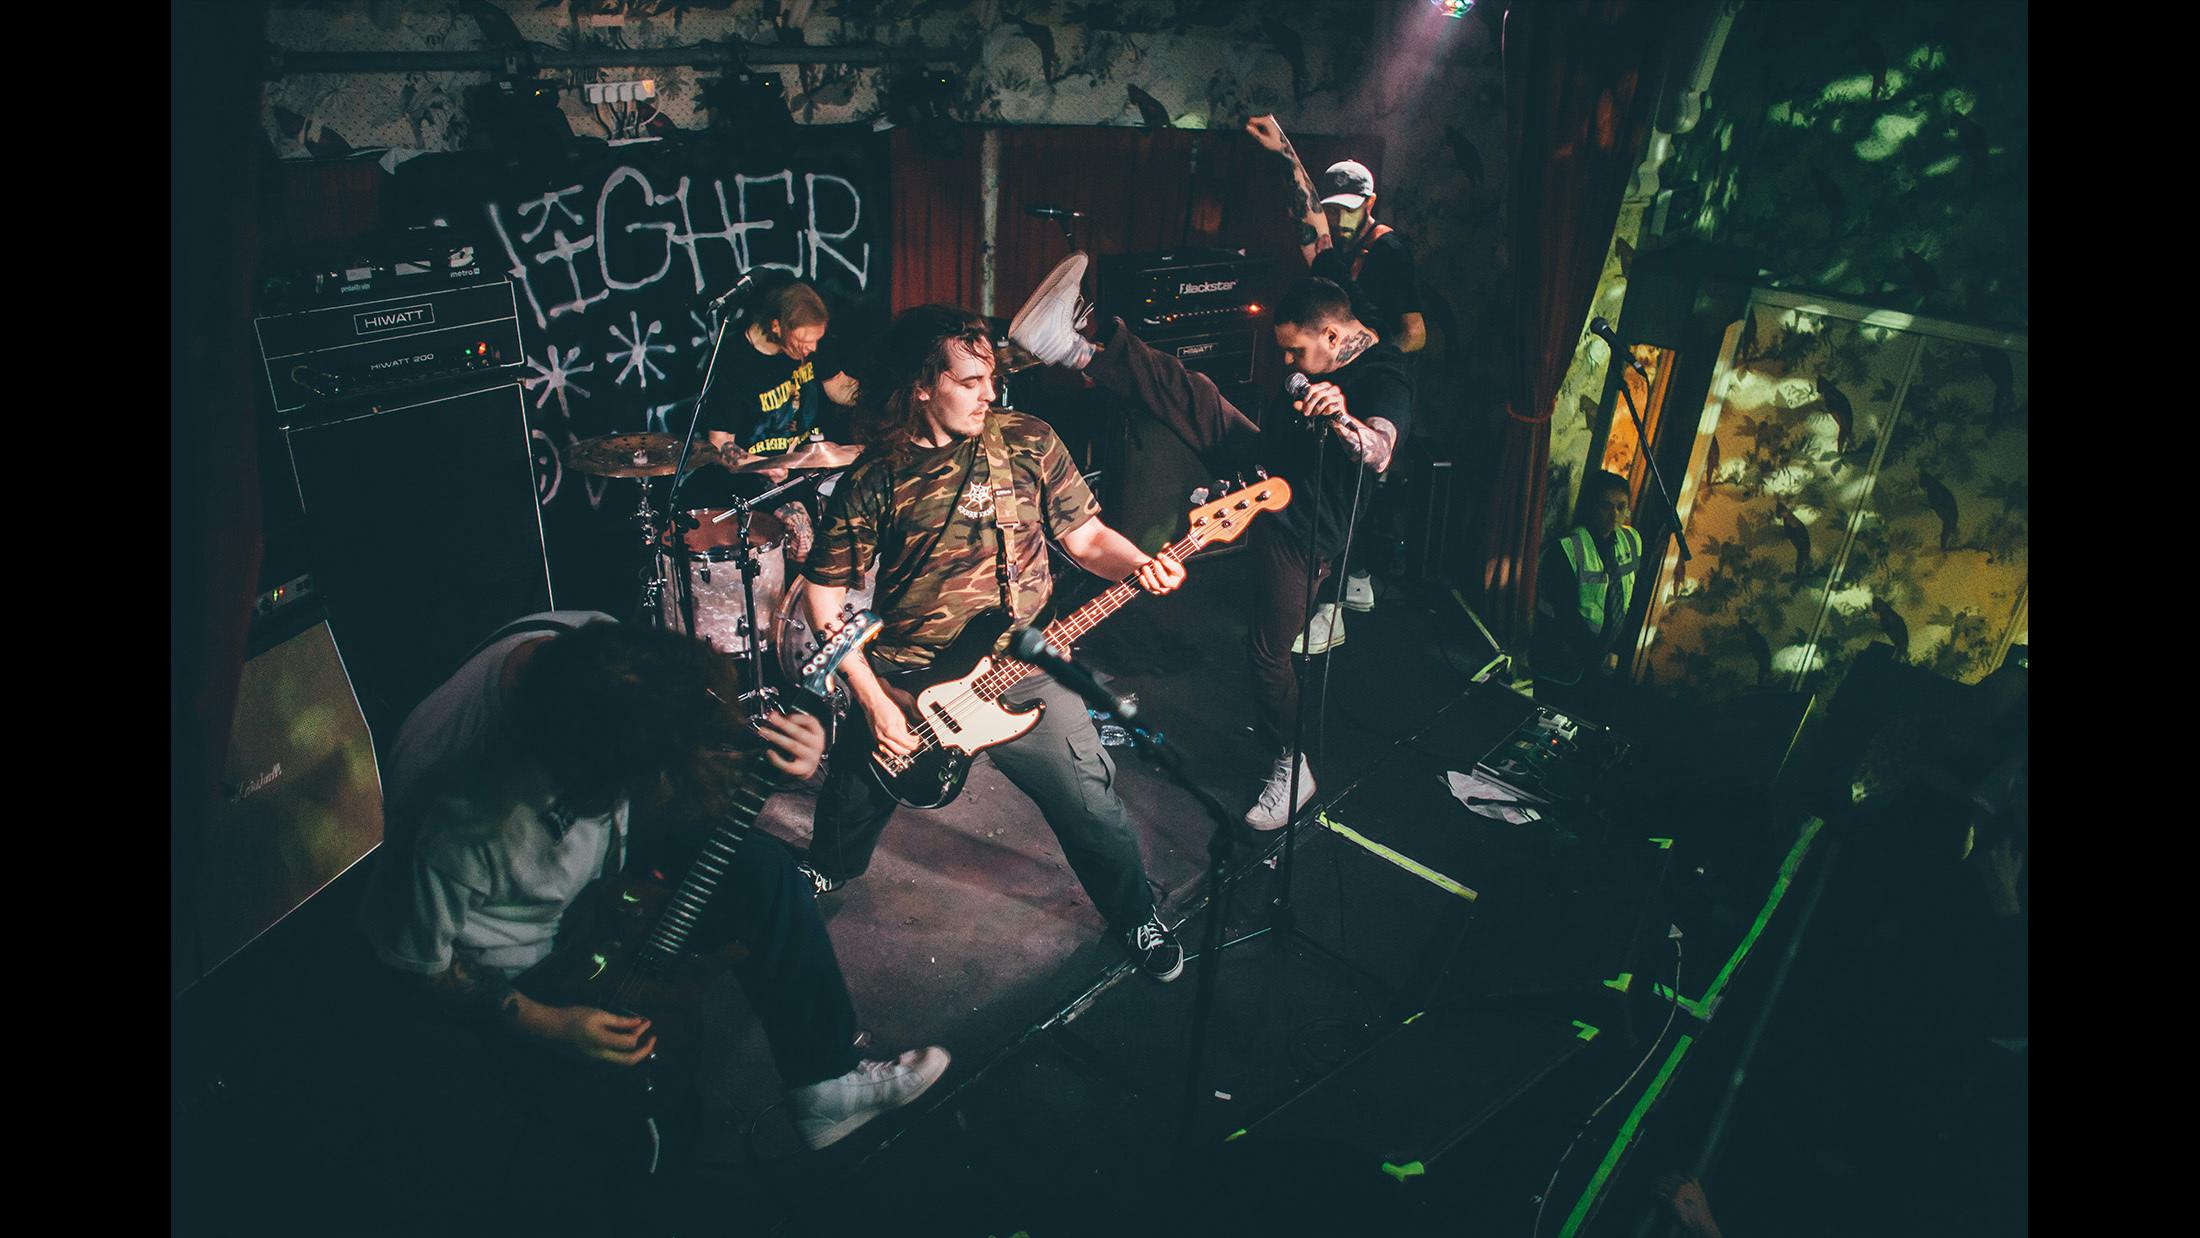 Higher Power playing in Manchester on their run with Basement earlier this year.